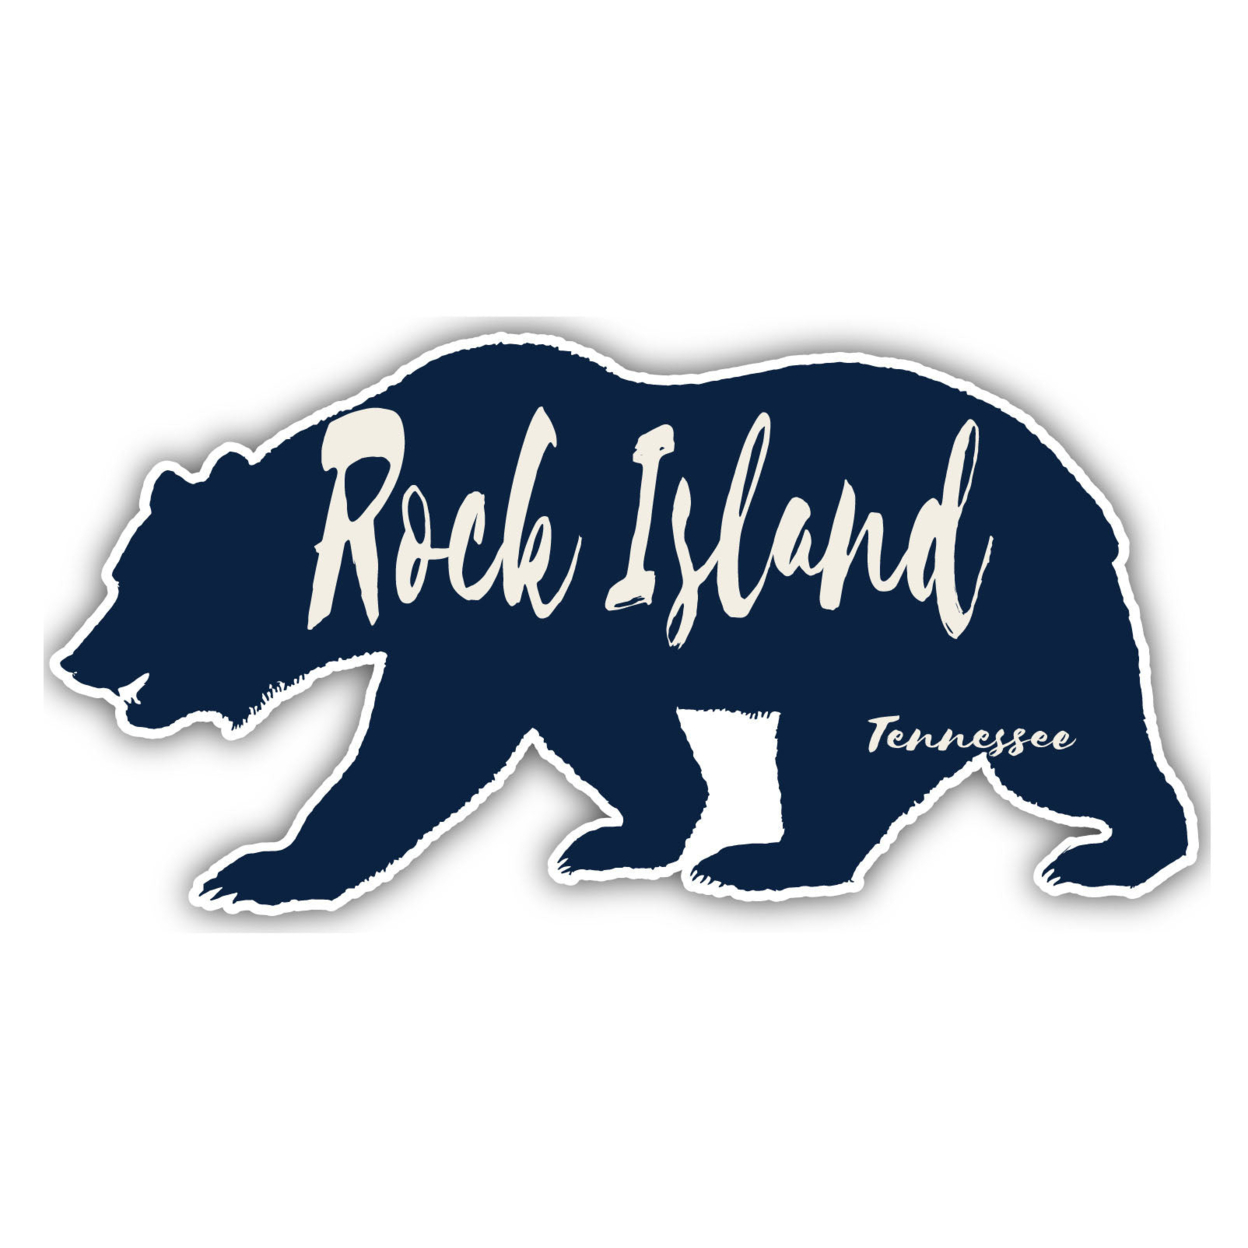 Rock Island Tennessee Souvenir Decorative Stickers (Choose Theme And Size) - Single Unit, 4-Inch, Bear